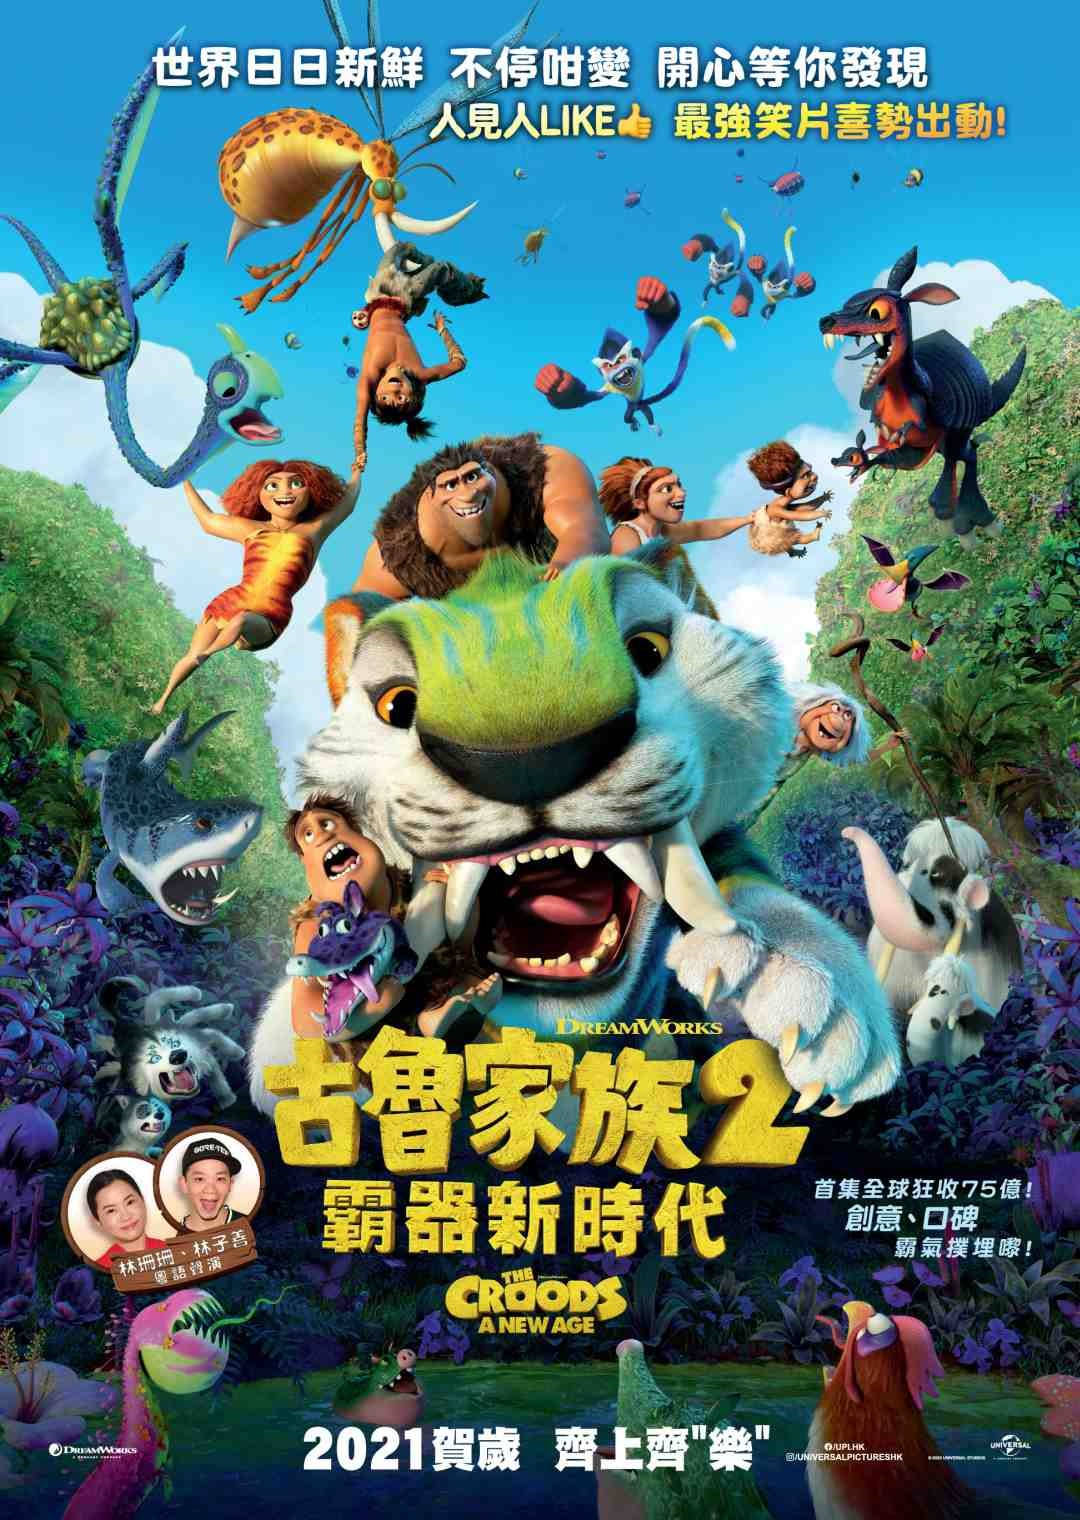 The Croods 2 Poster With Chinese Characters Wallpaper